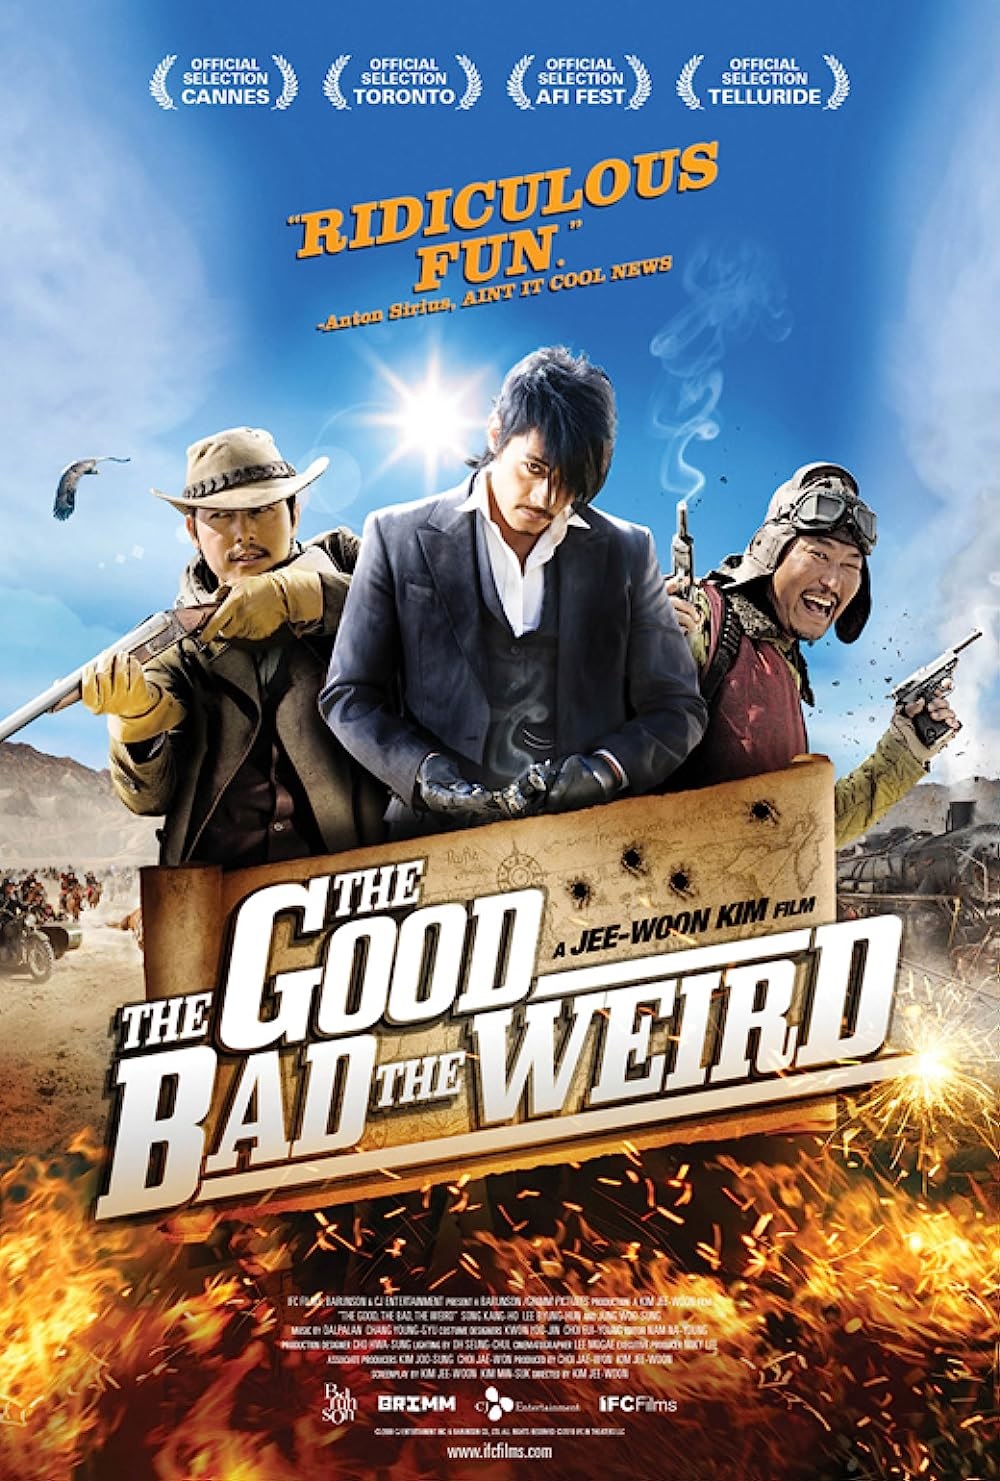 The Good, the Bad, the Weird 2008 Tamil Dubbed Action Movie Online